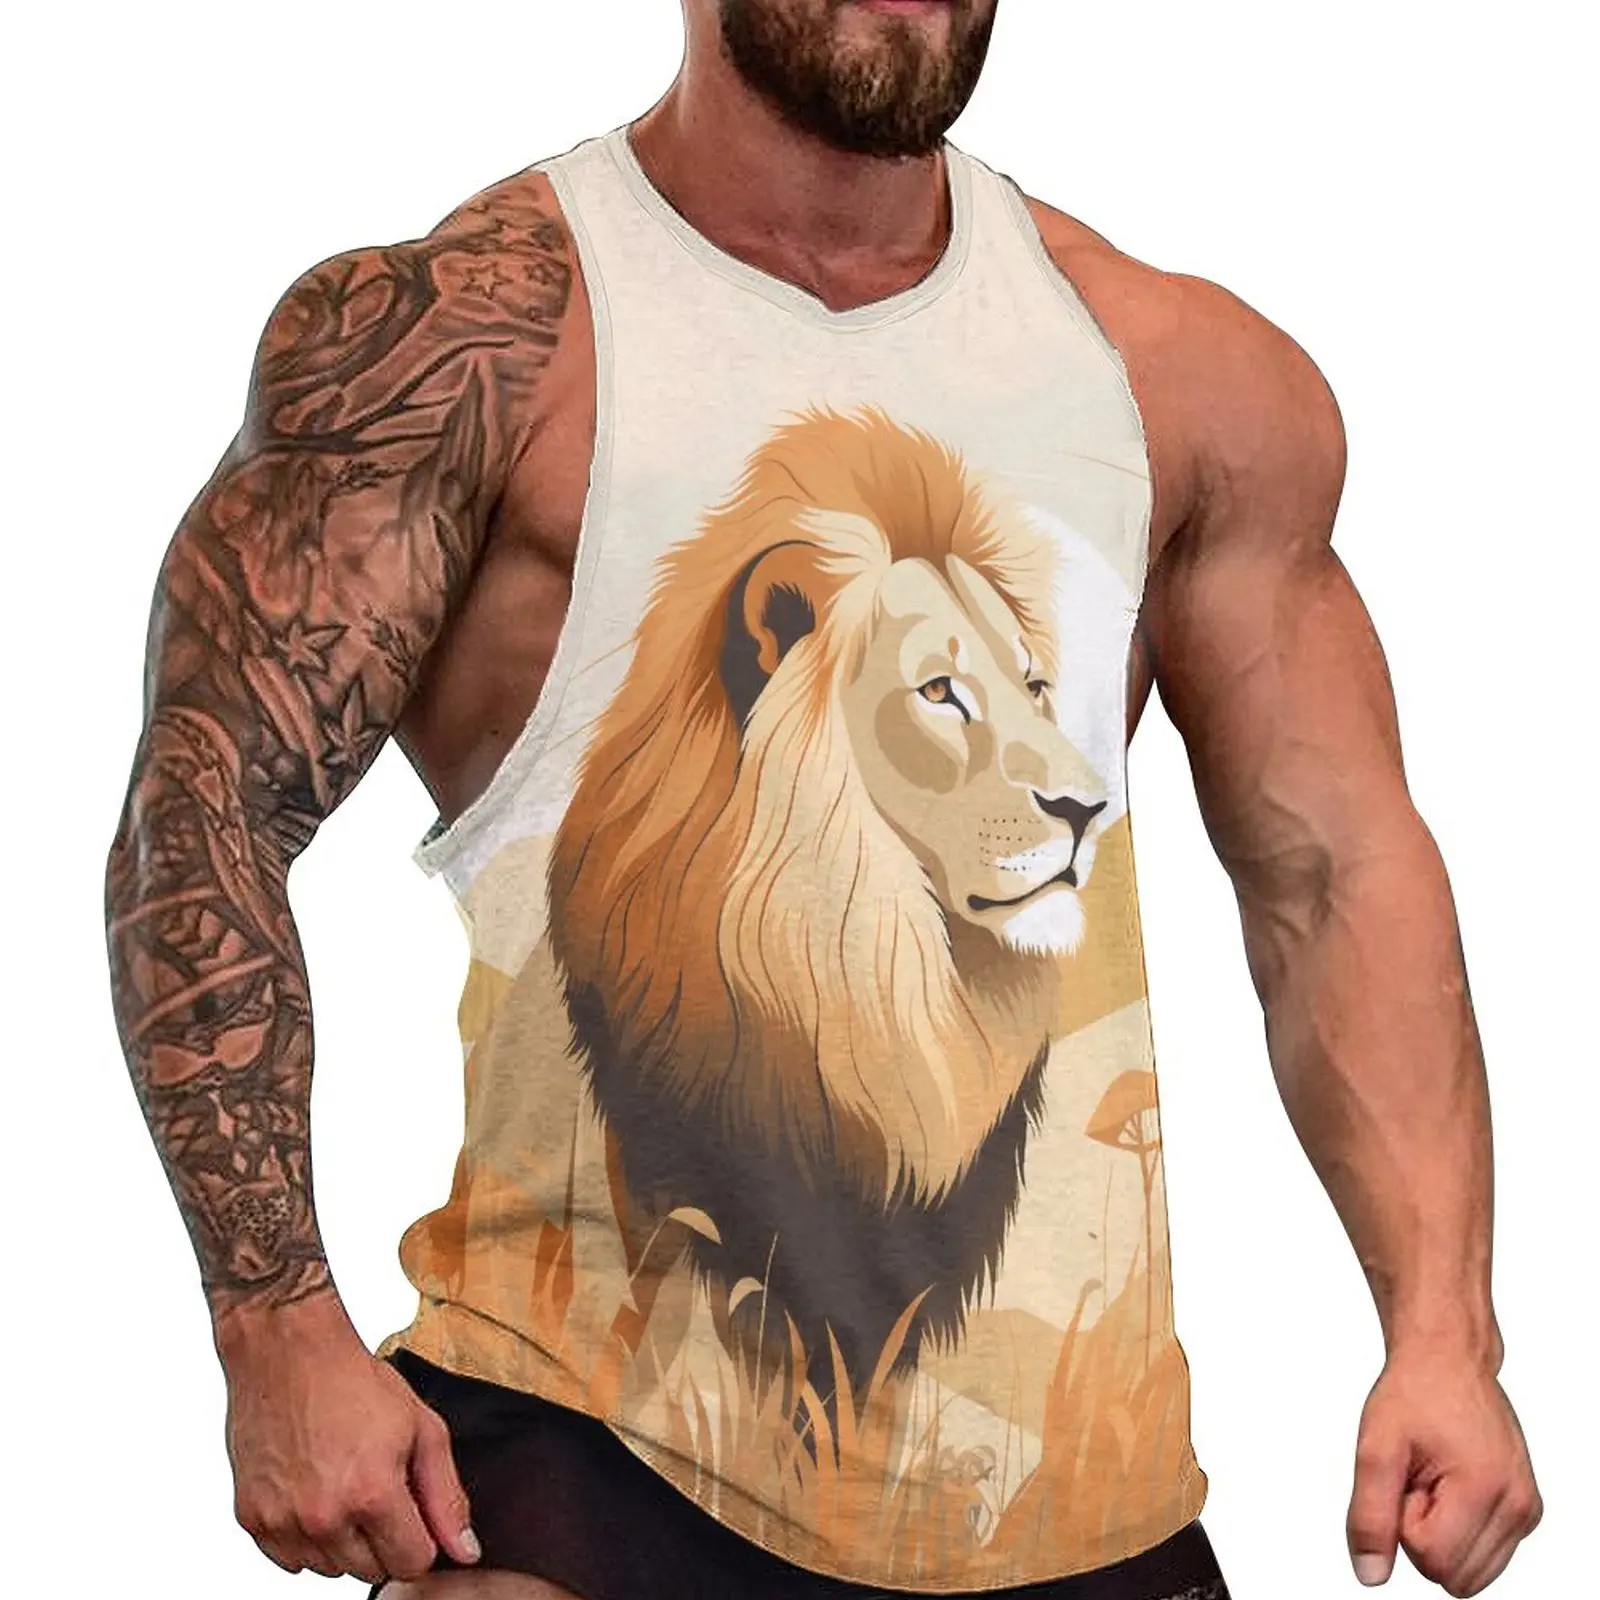 

Lion Tank Top Males Soft Colors Natural Harmony Training Oversized Tops Summer Trendy Printed Sleeveless Vests